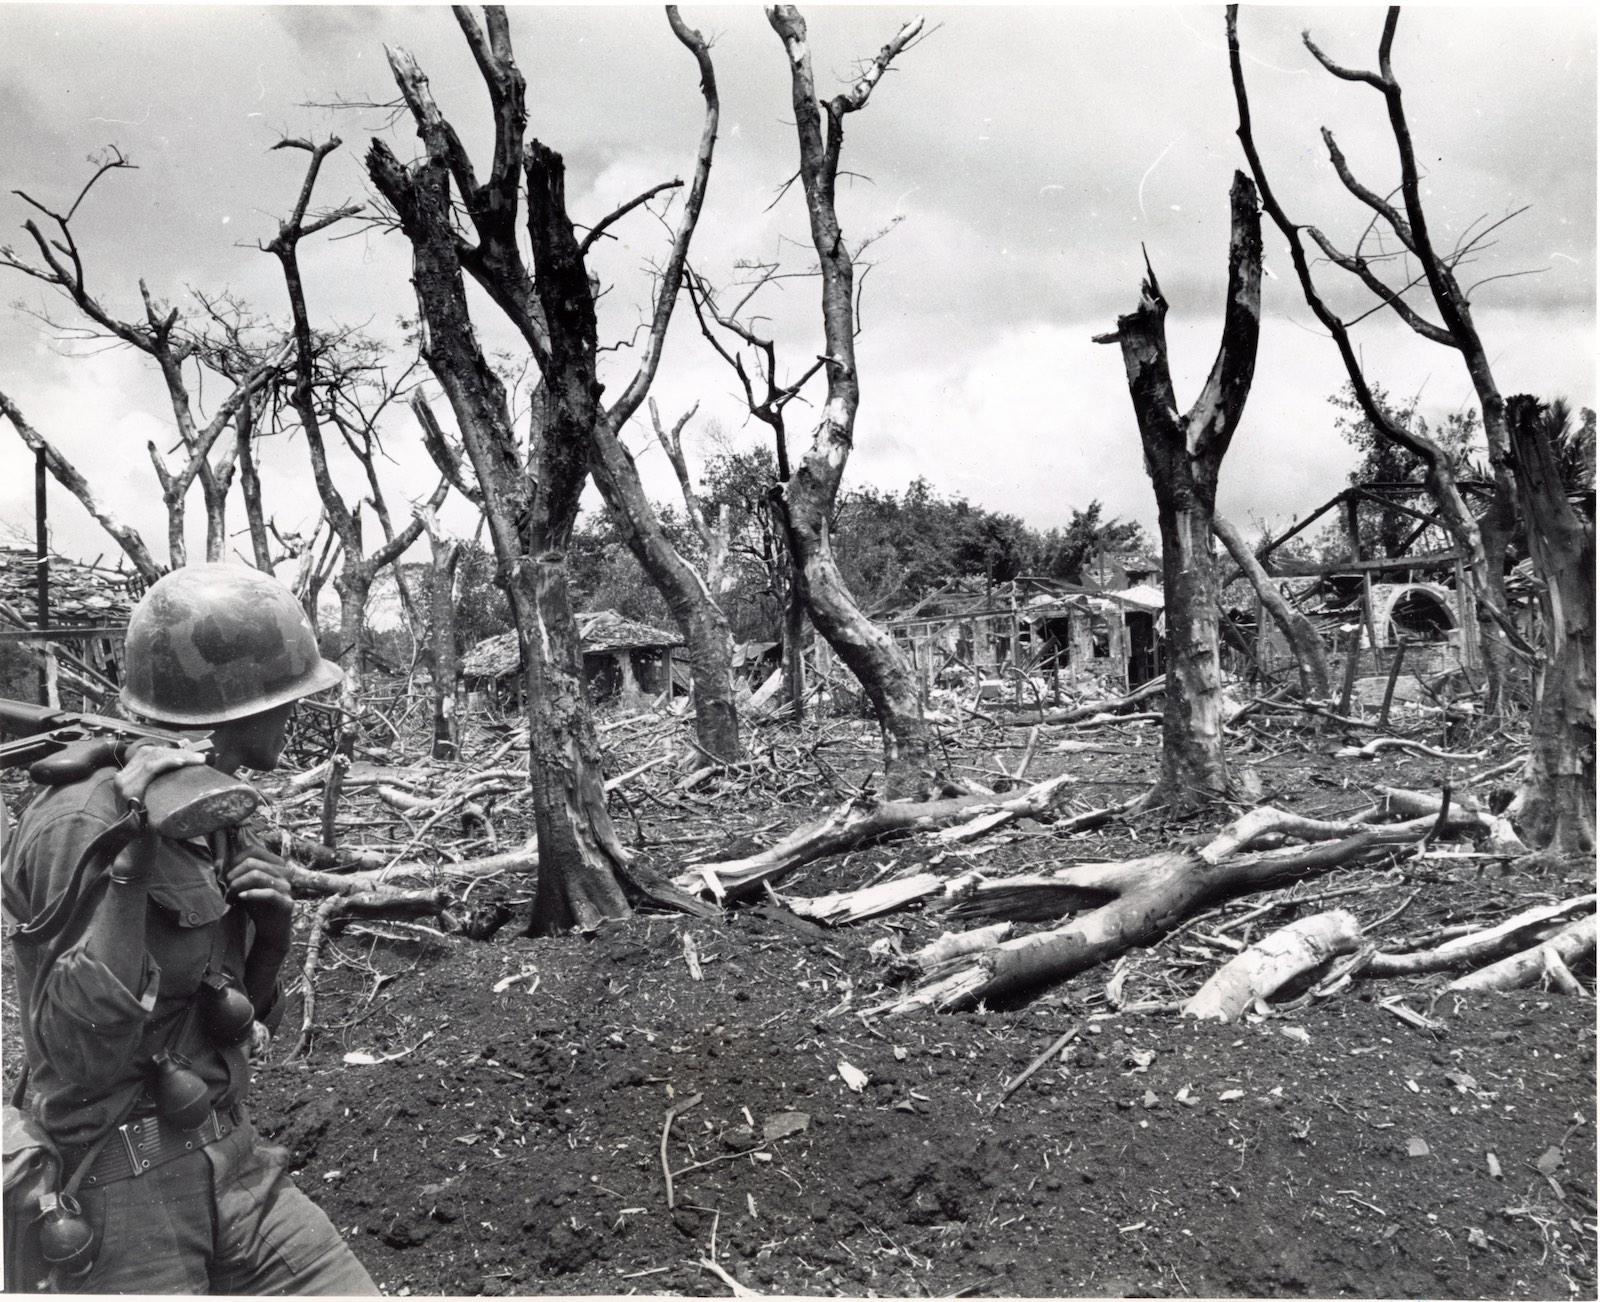 Anon (Wide World Photos), Rubber Plantation Town at Thuan Loi, June 1965.